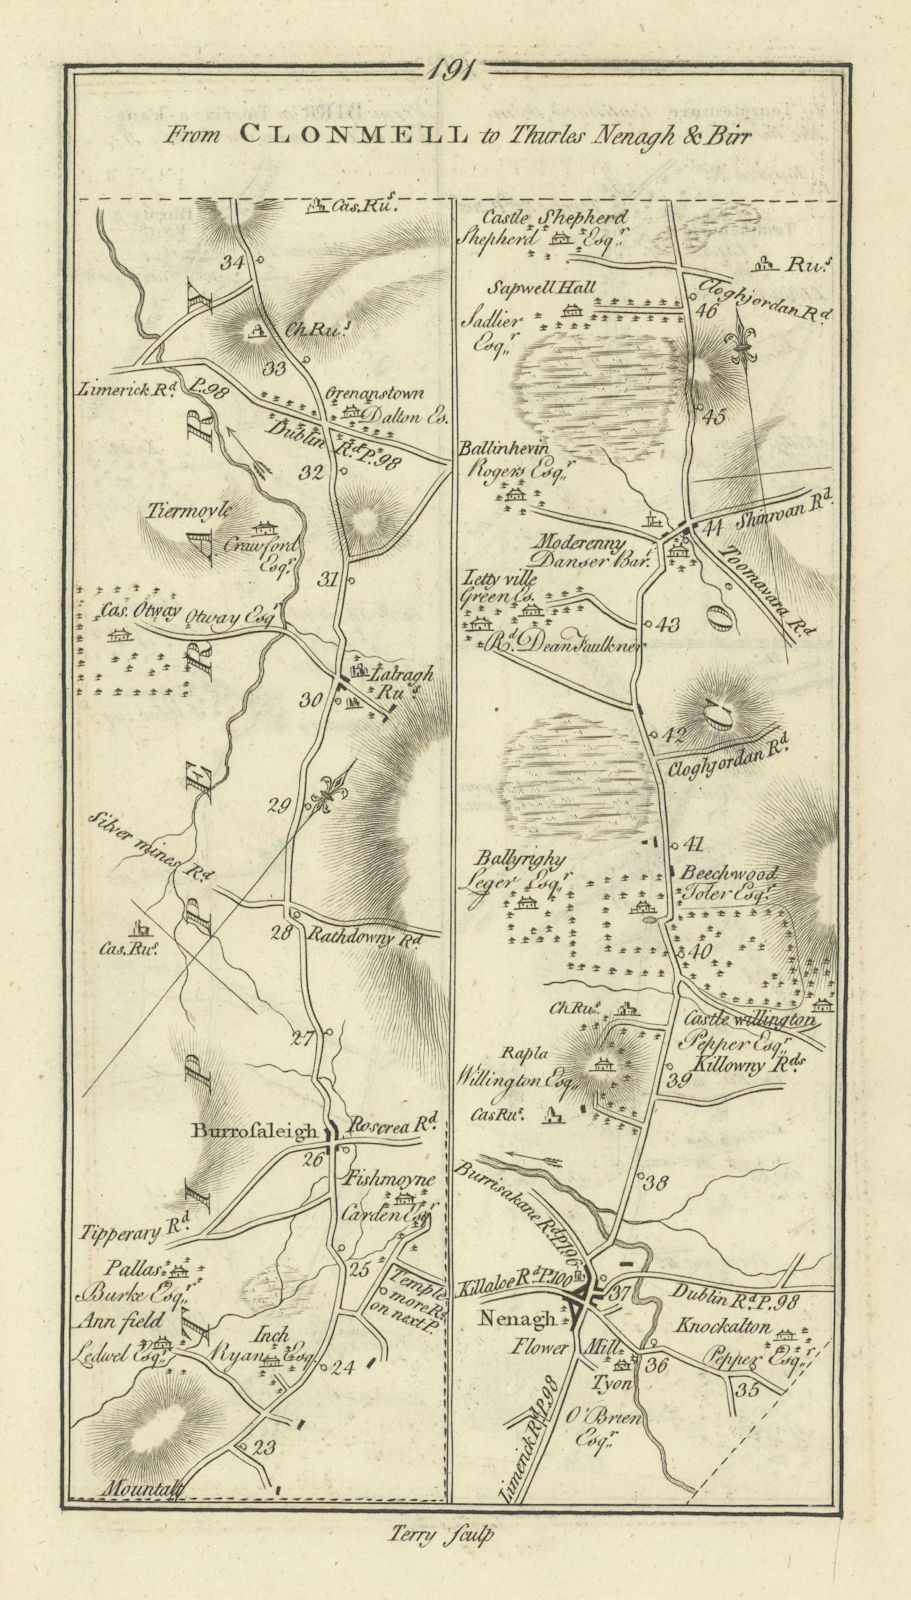 Associate Product #191 Clonmell to Thurles, Nenagh & Birr. Borrisoleigh. TAYLOR/SKINNER 1778 map